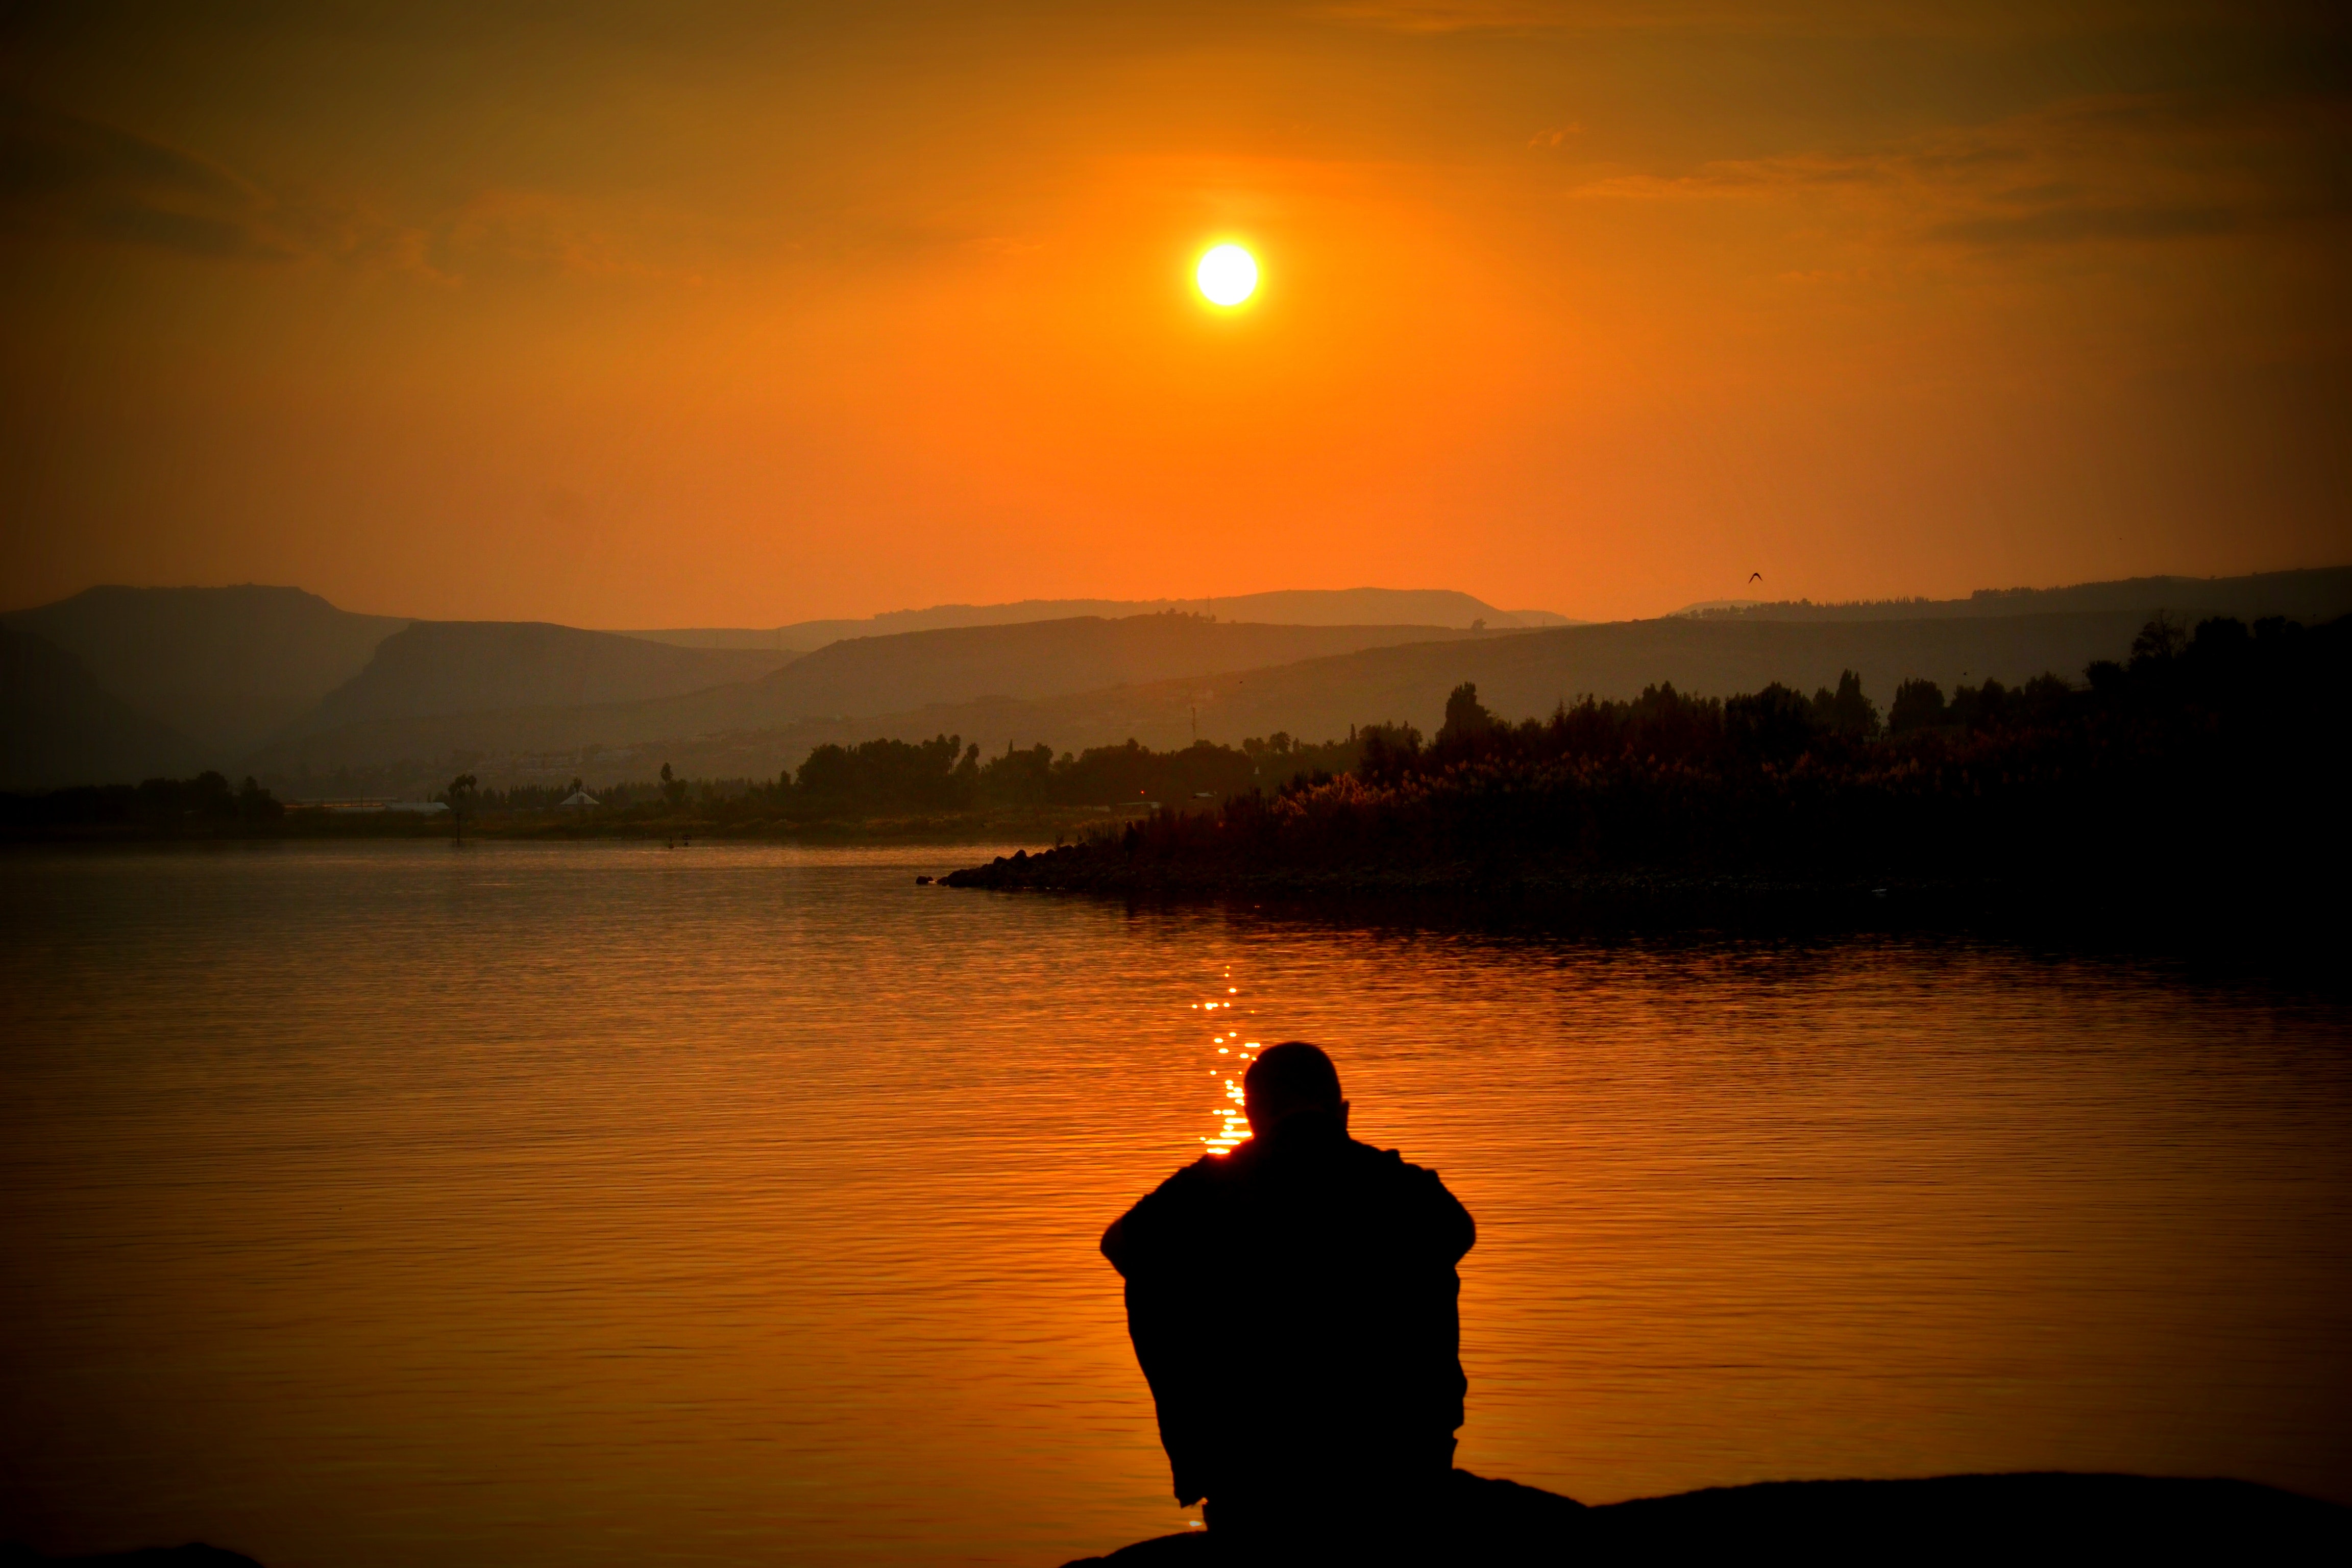 Boy in the evening in front of river and sun